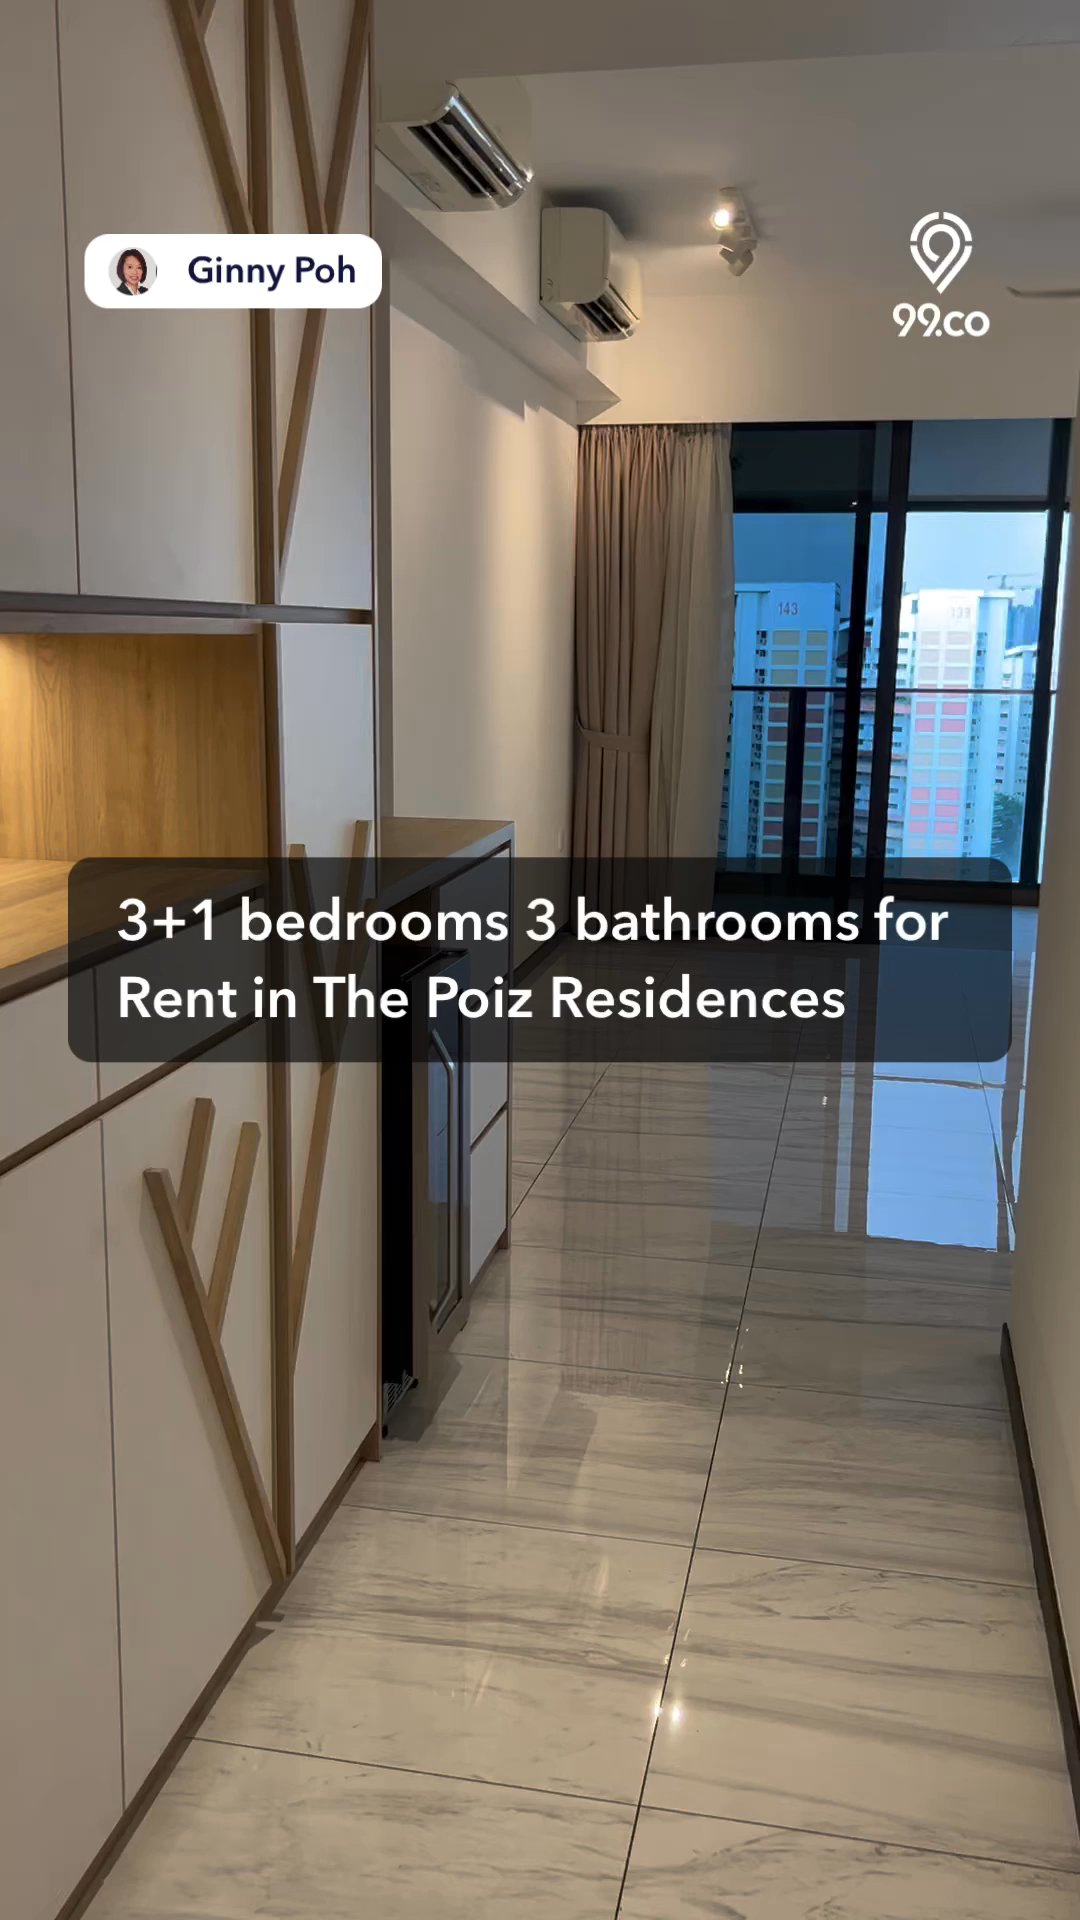 undefined of 1,184 sqft Apartment for Rent in The Poiz Residences